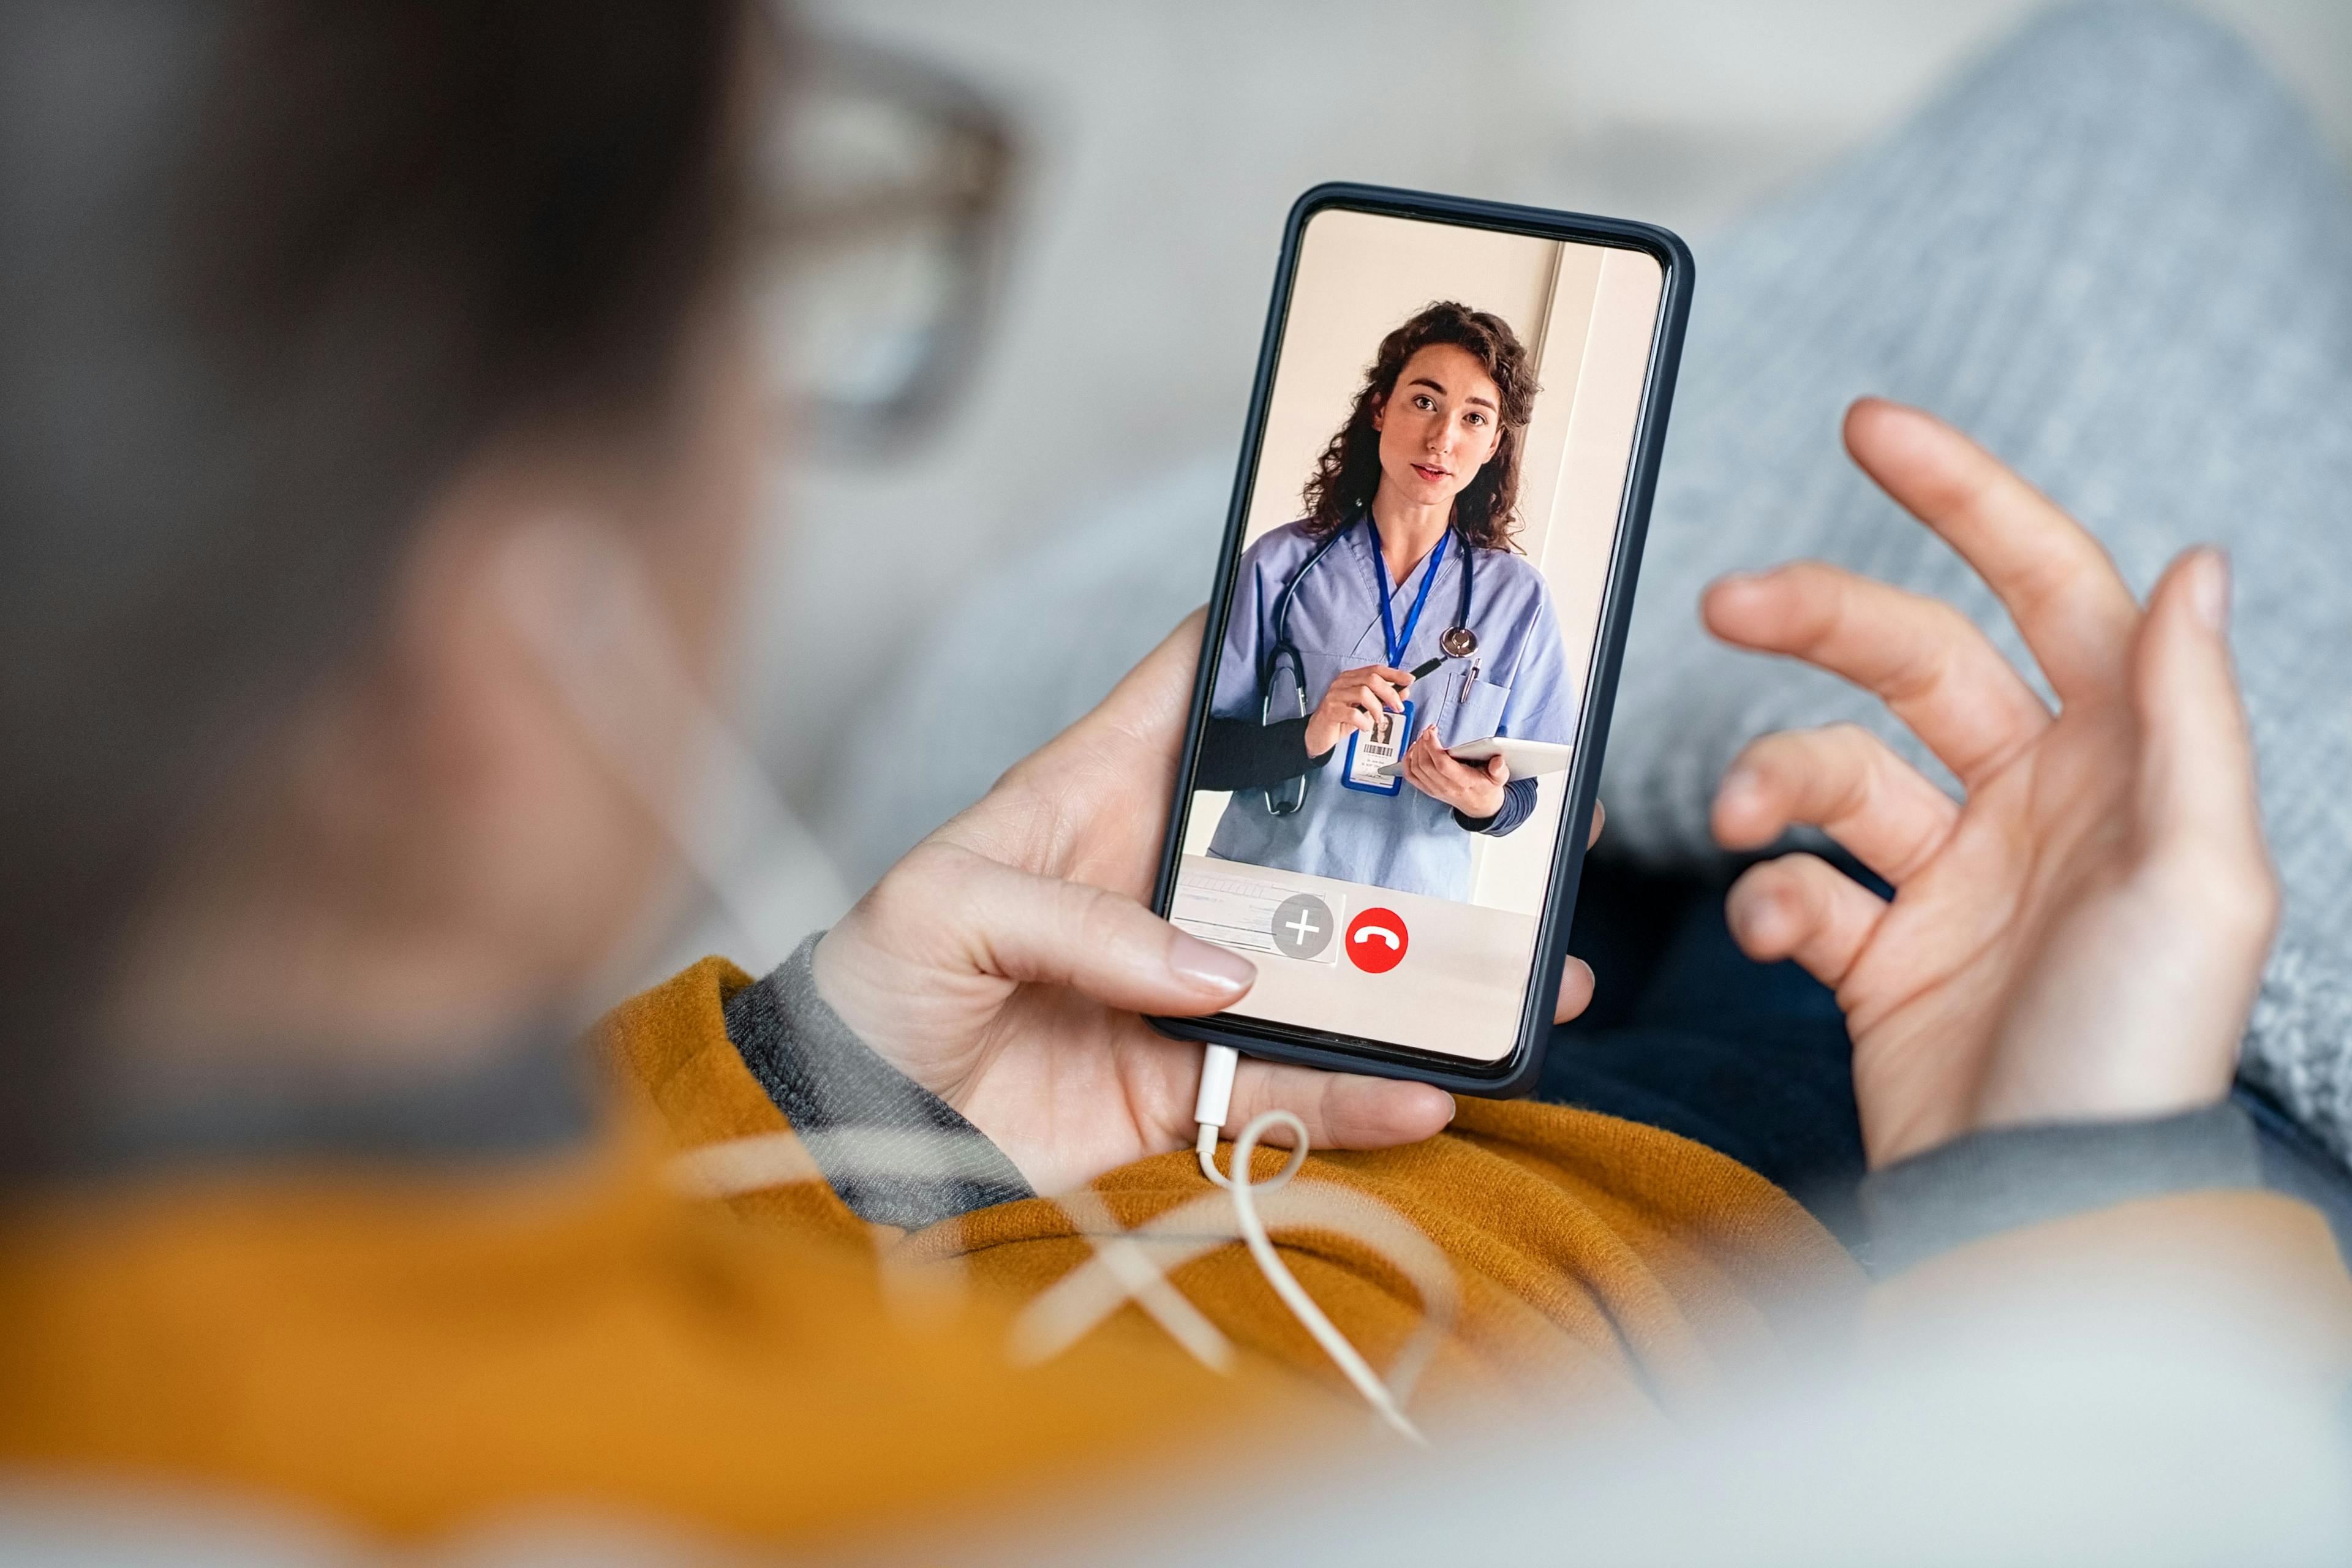 Woman doing video call with doctor. Credit: Rido - stock.adobe.com